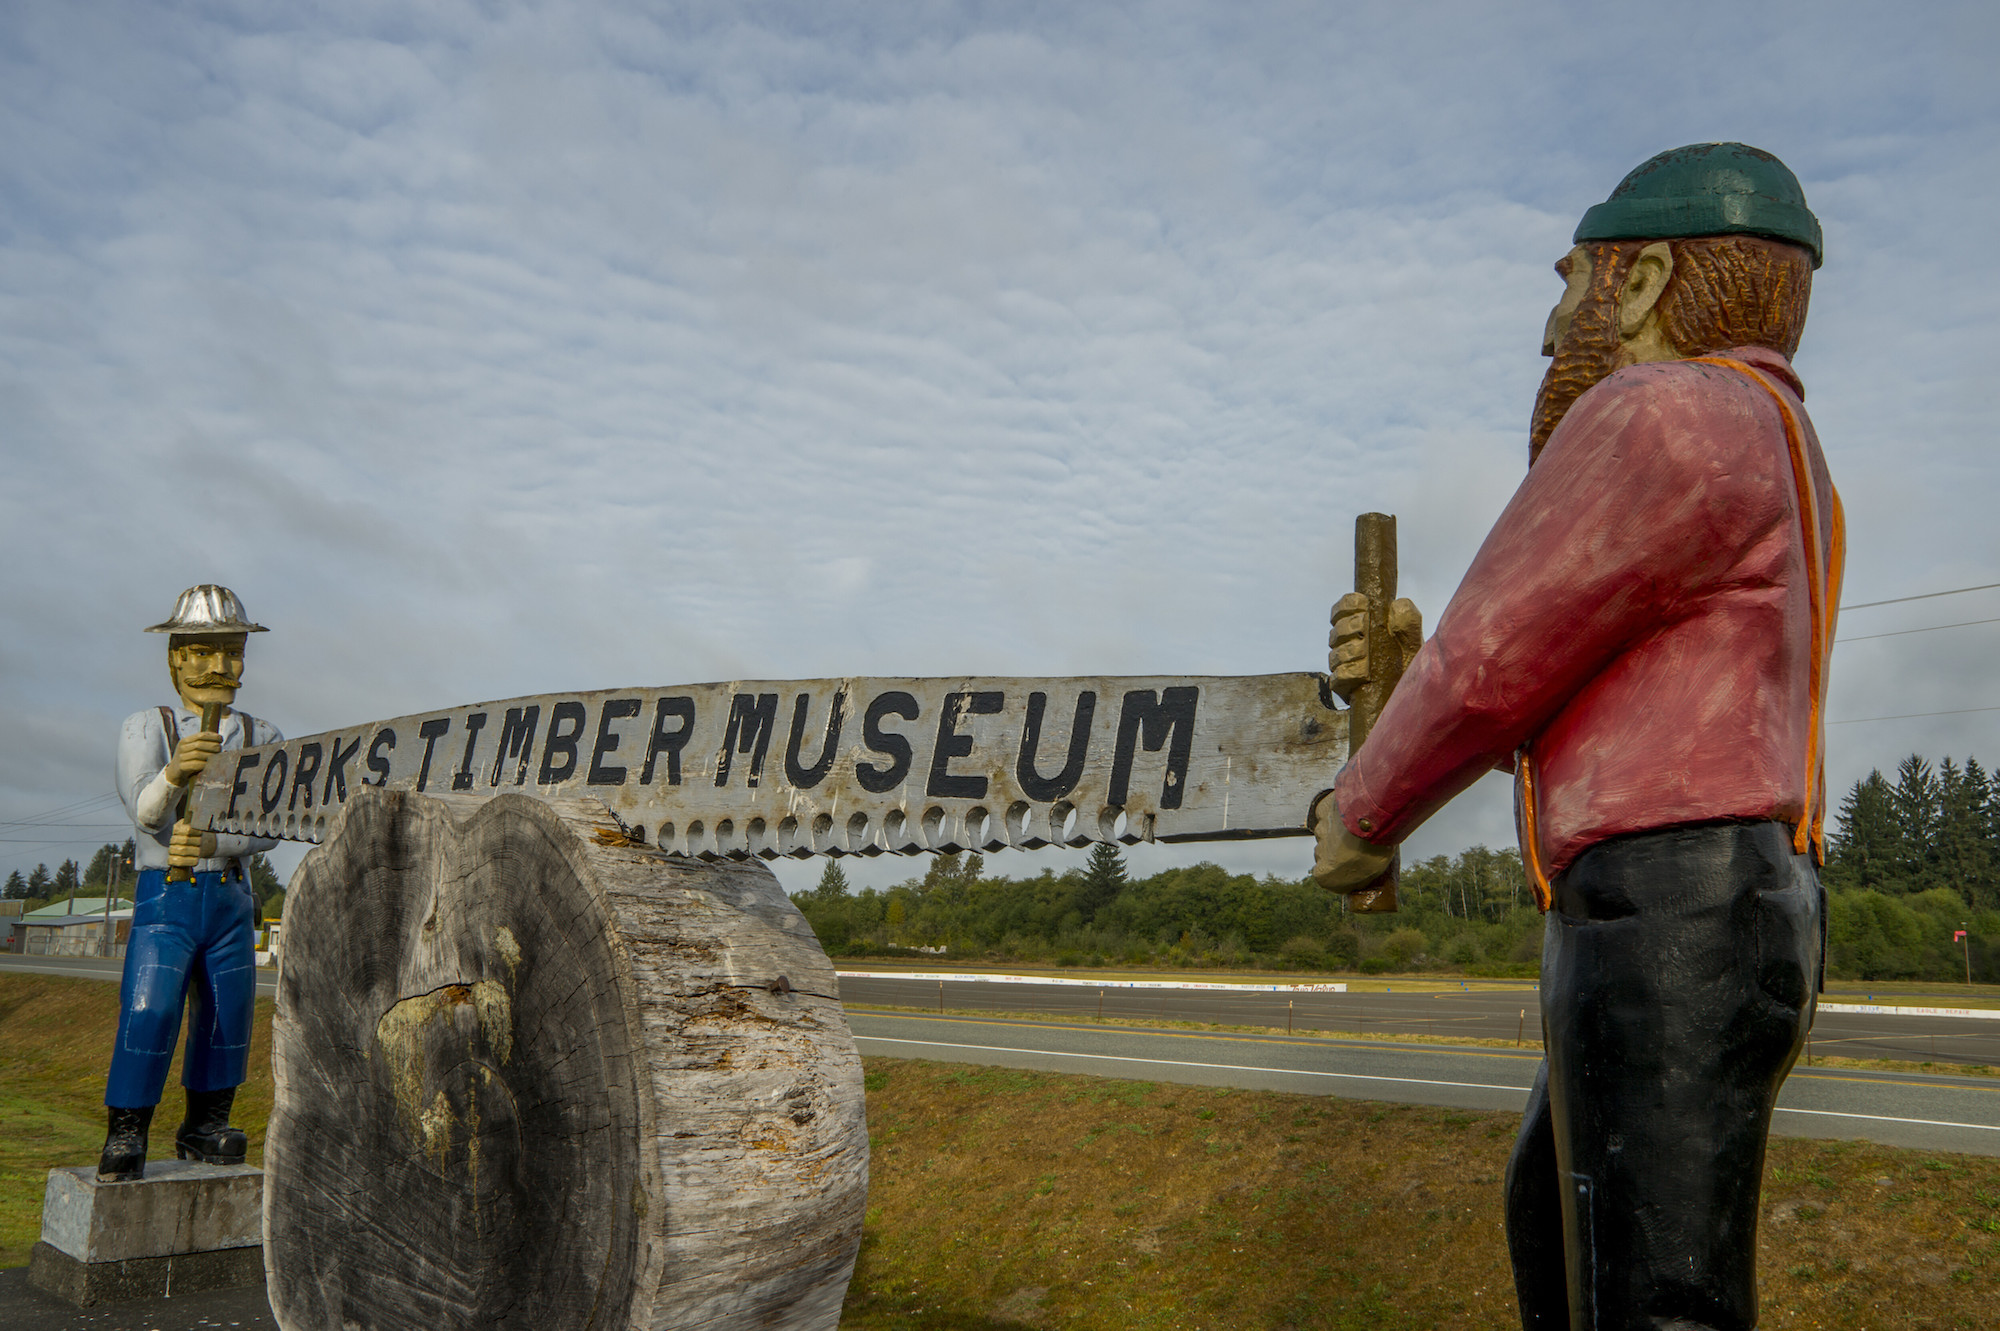 Wooden statue advertising the Forks Timber Museum in Forks, Washington